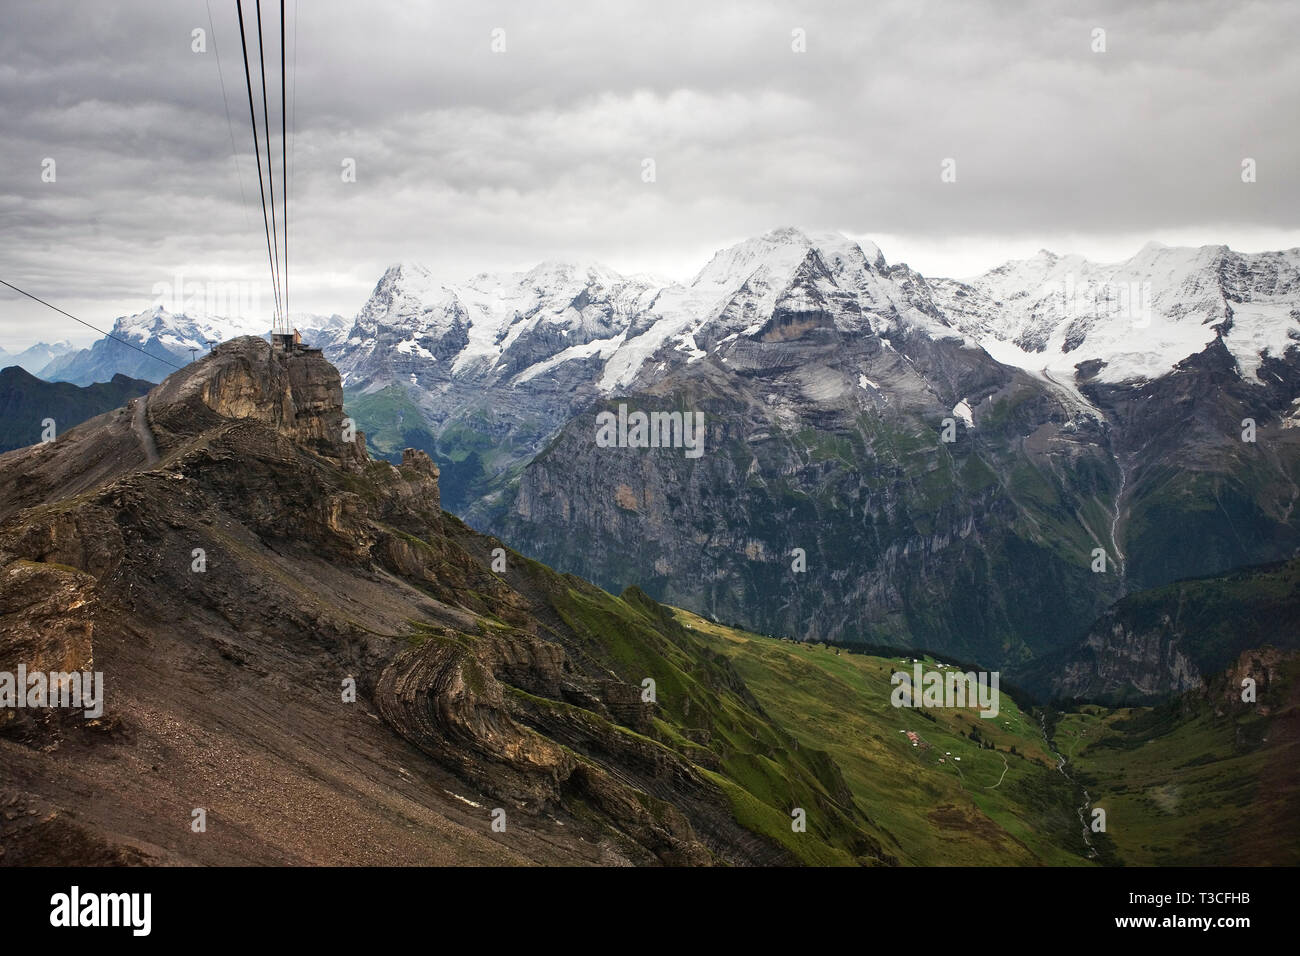 The Birg cablecar station perched above a cliff with the Jungfrau Massif and the Lauterbrunnen valley beyond, Bernese Oberland, Switzerland Stock Photo